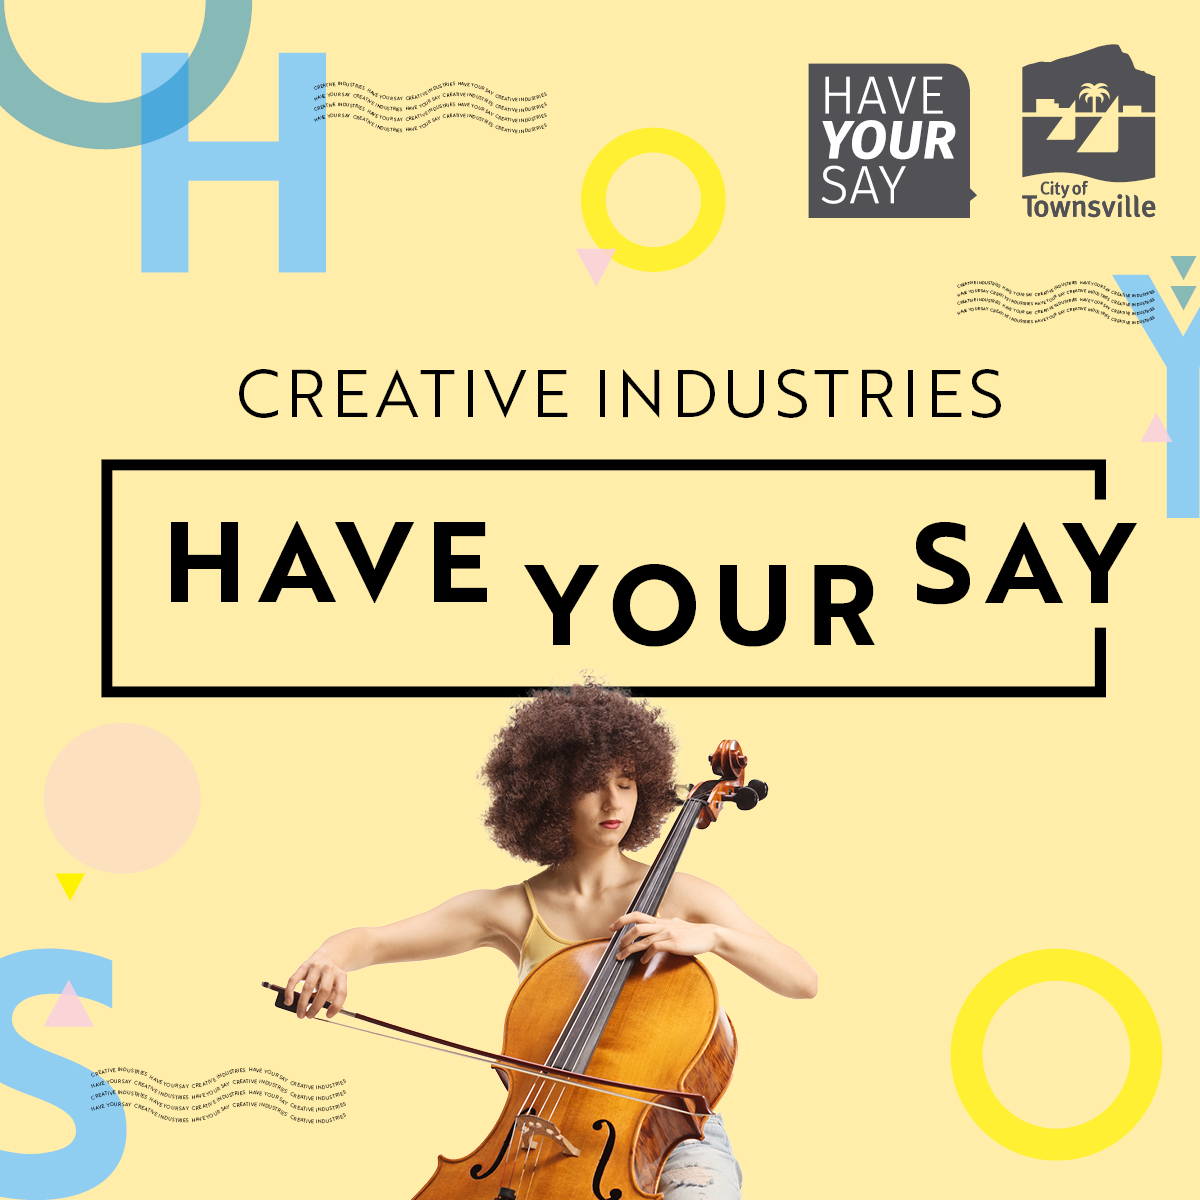 💕Help #AFCM and the regional arts by taking this 5 minute survey! The arts sector is important and we want it to keep growing. Visit Council’s Have Your Say website for more information haveyoursay.townsville.qld.gov.au/creative ✅ #chambermusic #townsville #townsvilleshines #survey #TCC #arts